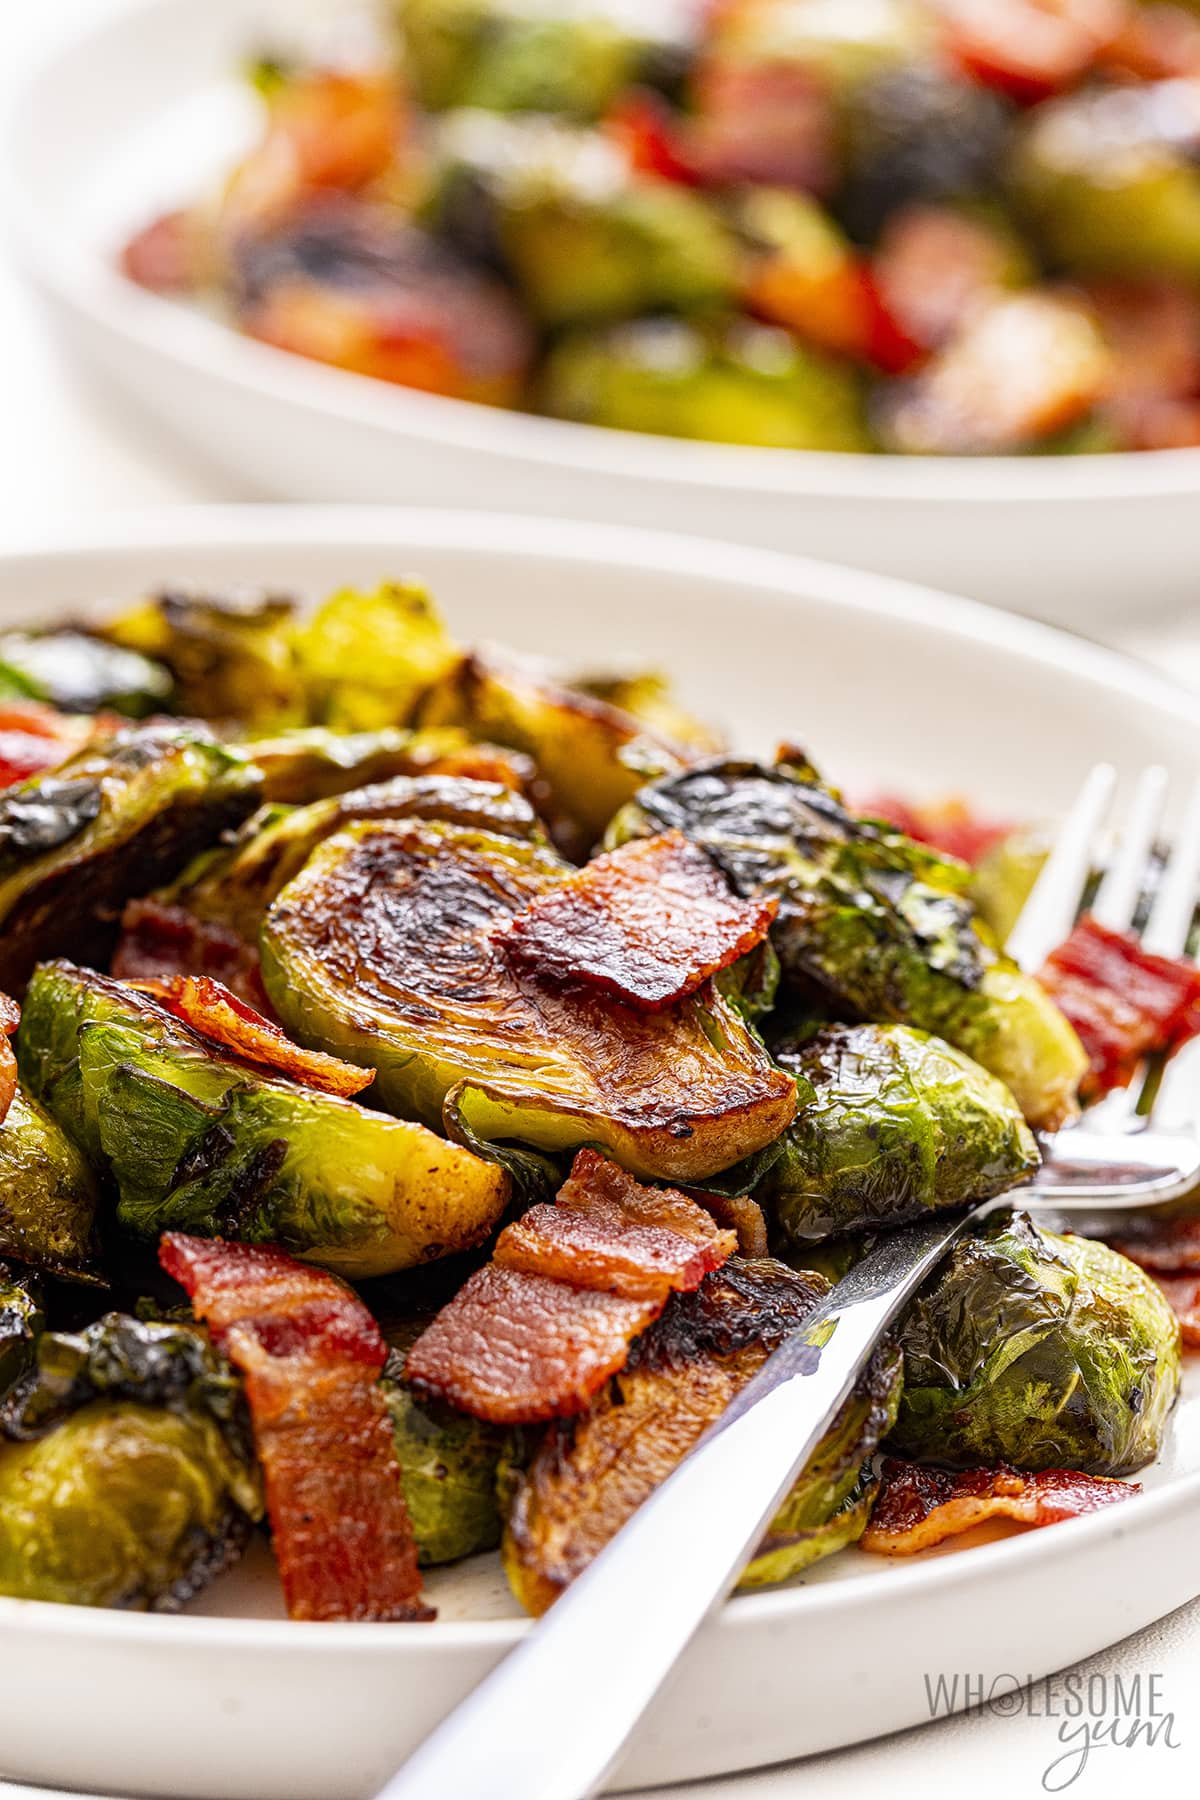 Sautéed Brussels sprouts on plate, side view.